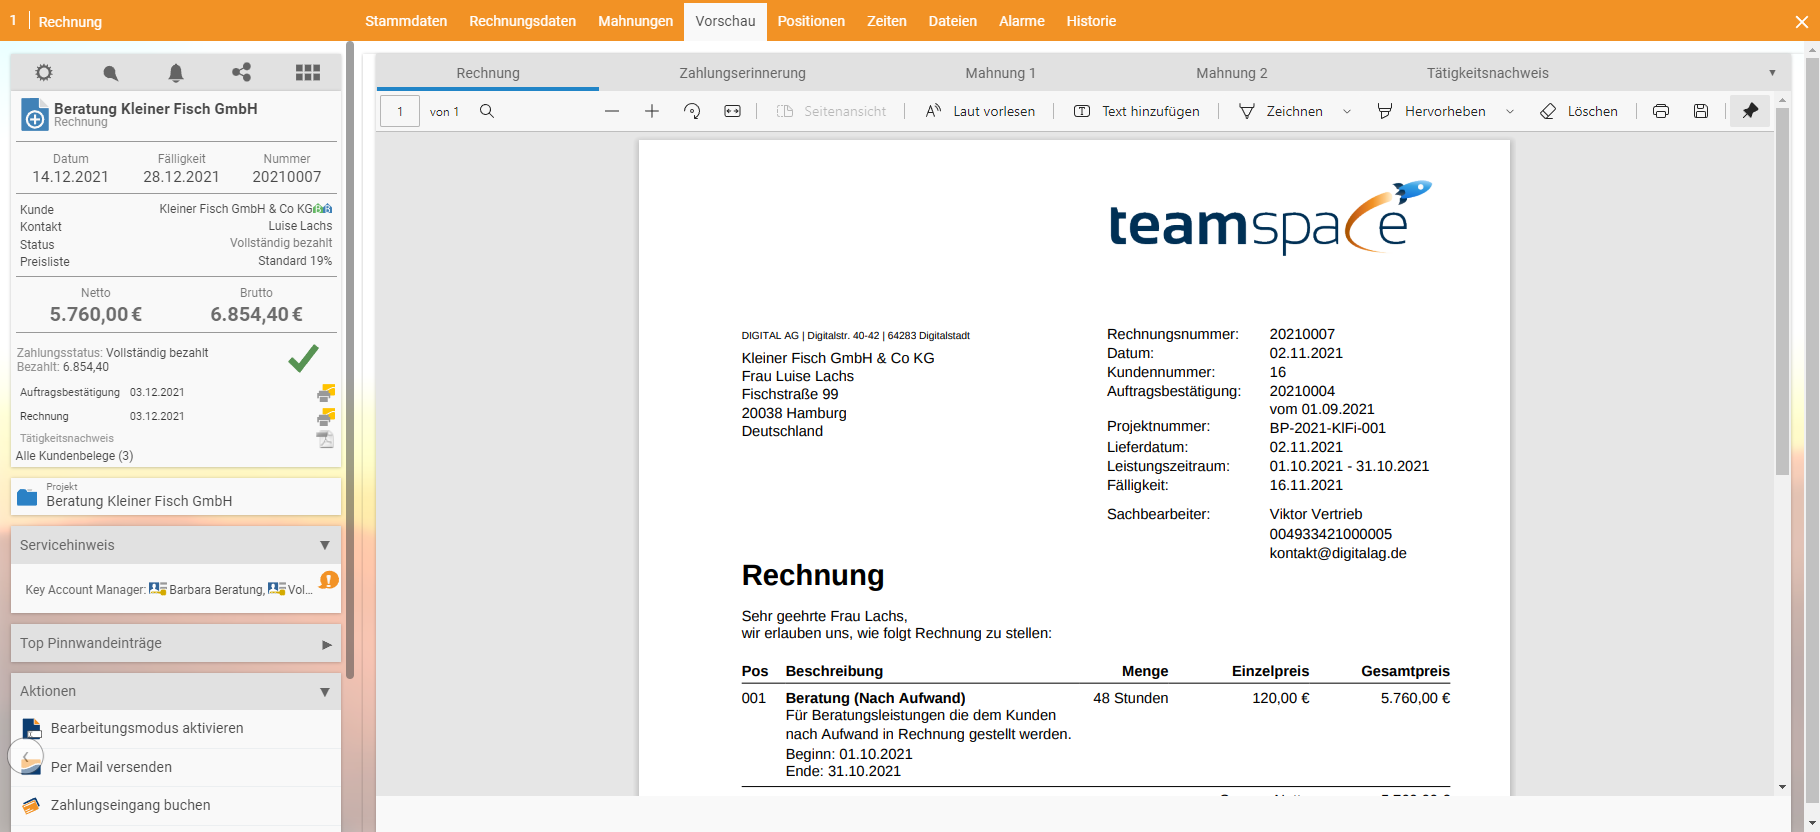 teamspace invoice, order and offer management